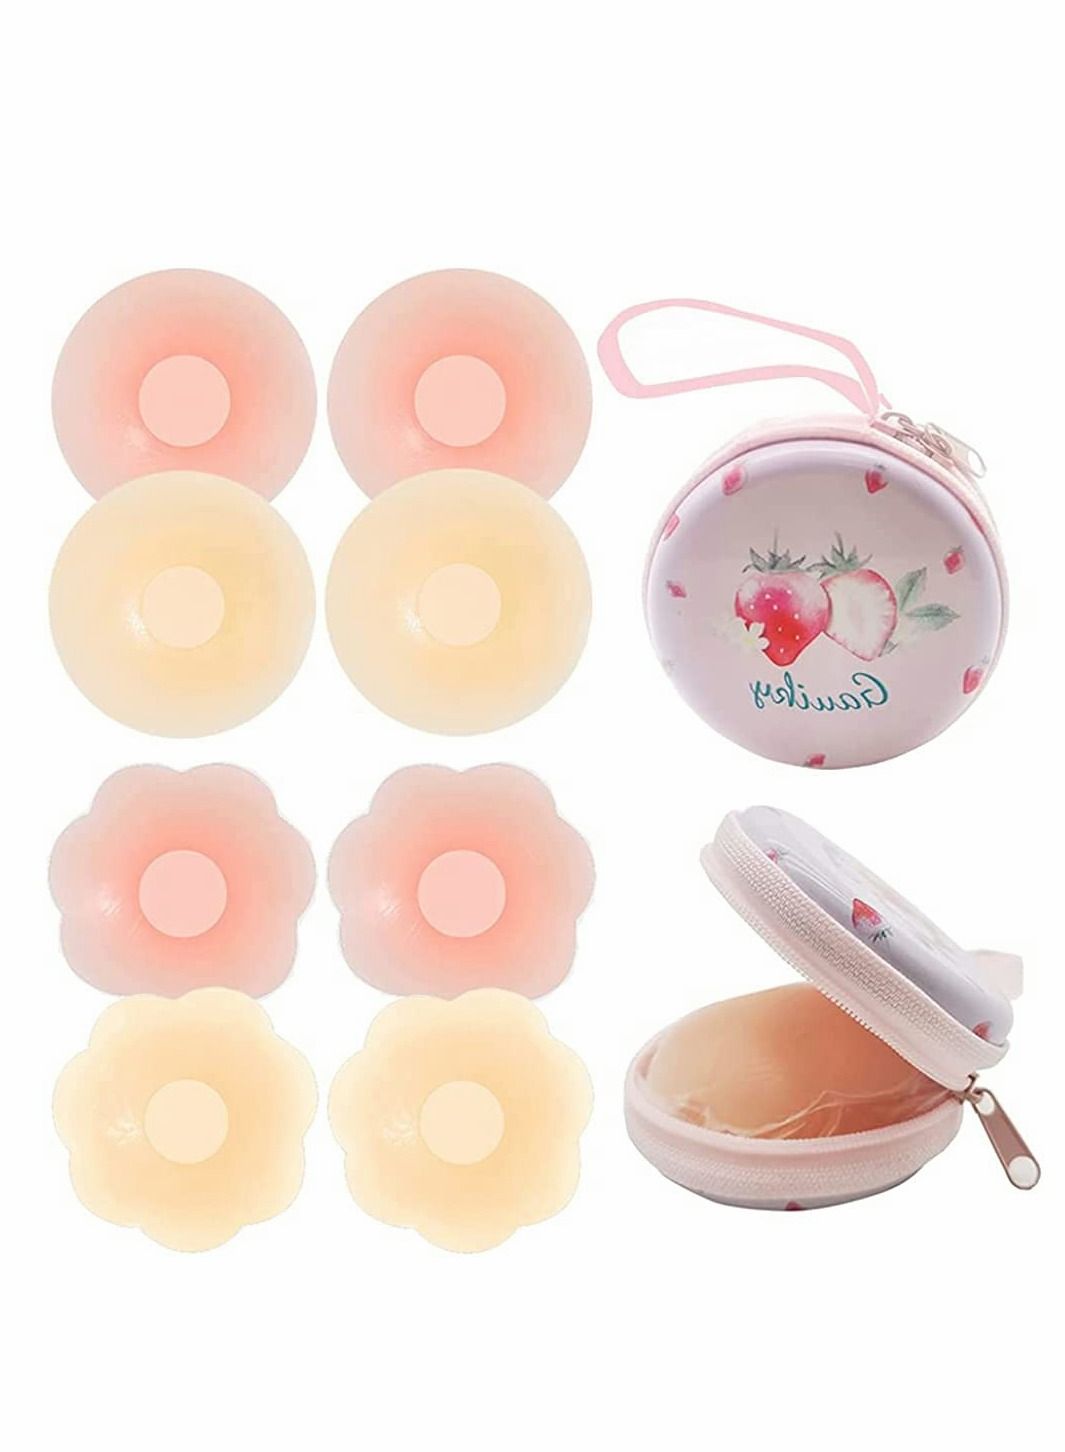 SYOSI Silicone Nipple Covers, 4 Pairs Women's Reusable Adhesive Invisible  Pasties Nippleless Covers, Invisible Adhesive Bras for Women & Girls Pink  and Skin color Round&Flower price in Dubai, UAE